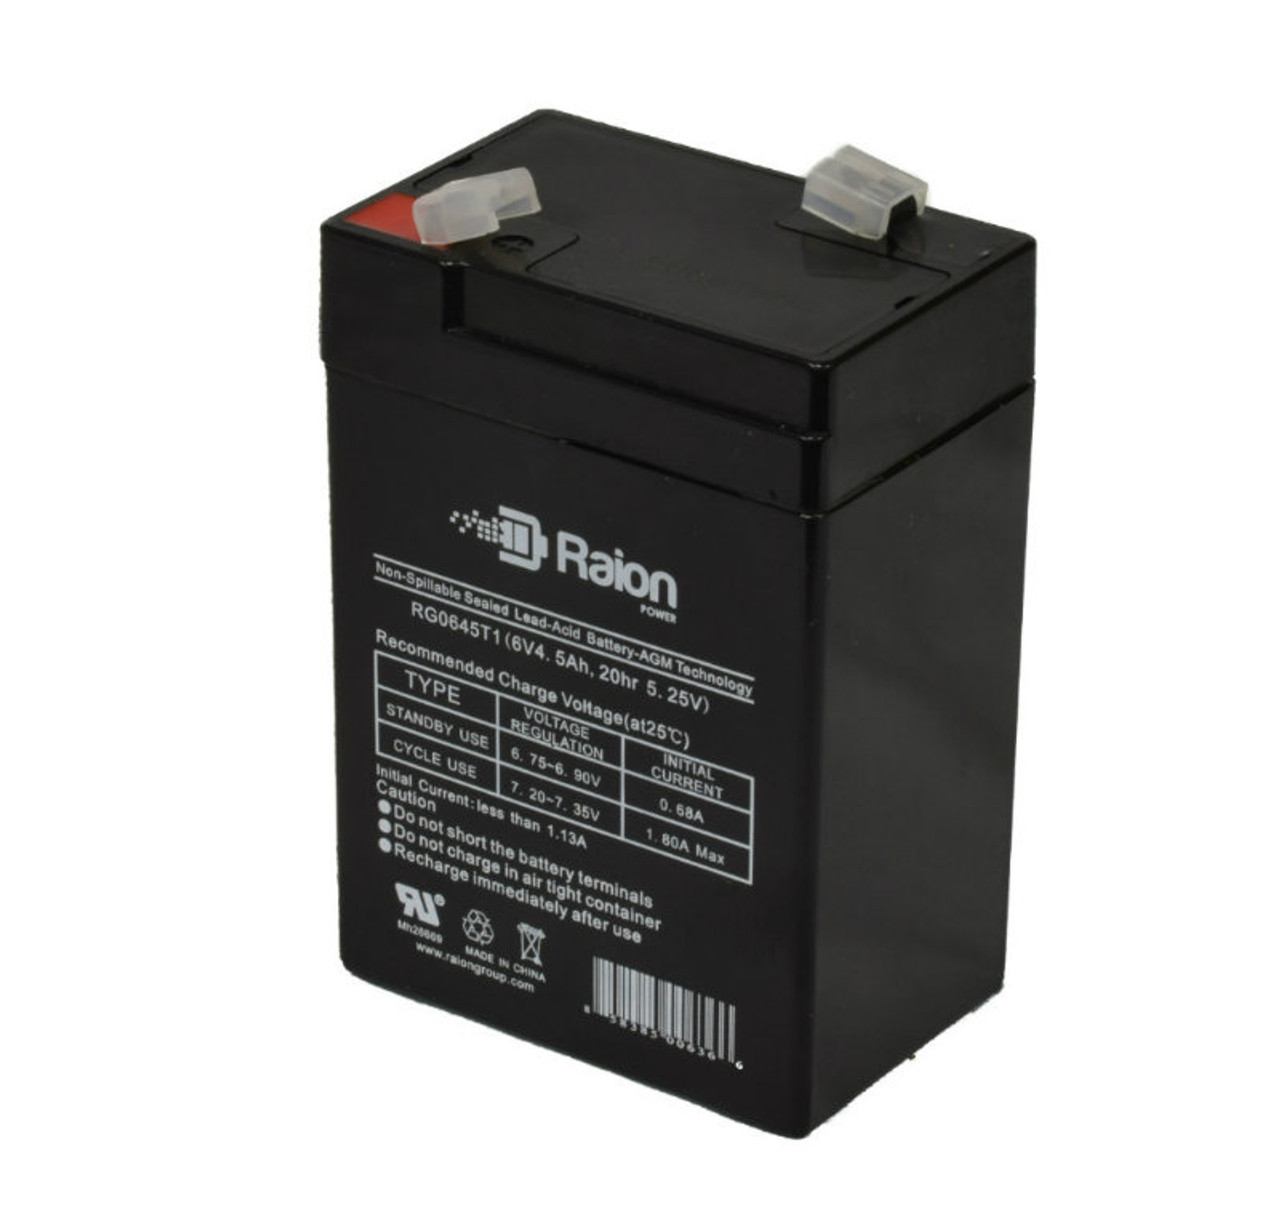 Raion Power RG0645T1 6V 4.5Ah Replacement Battery Cartridge for Light Alarms CE15BS